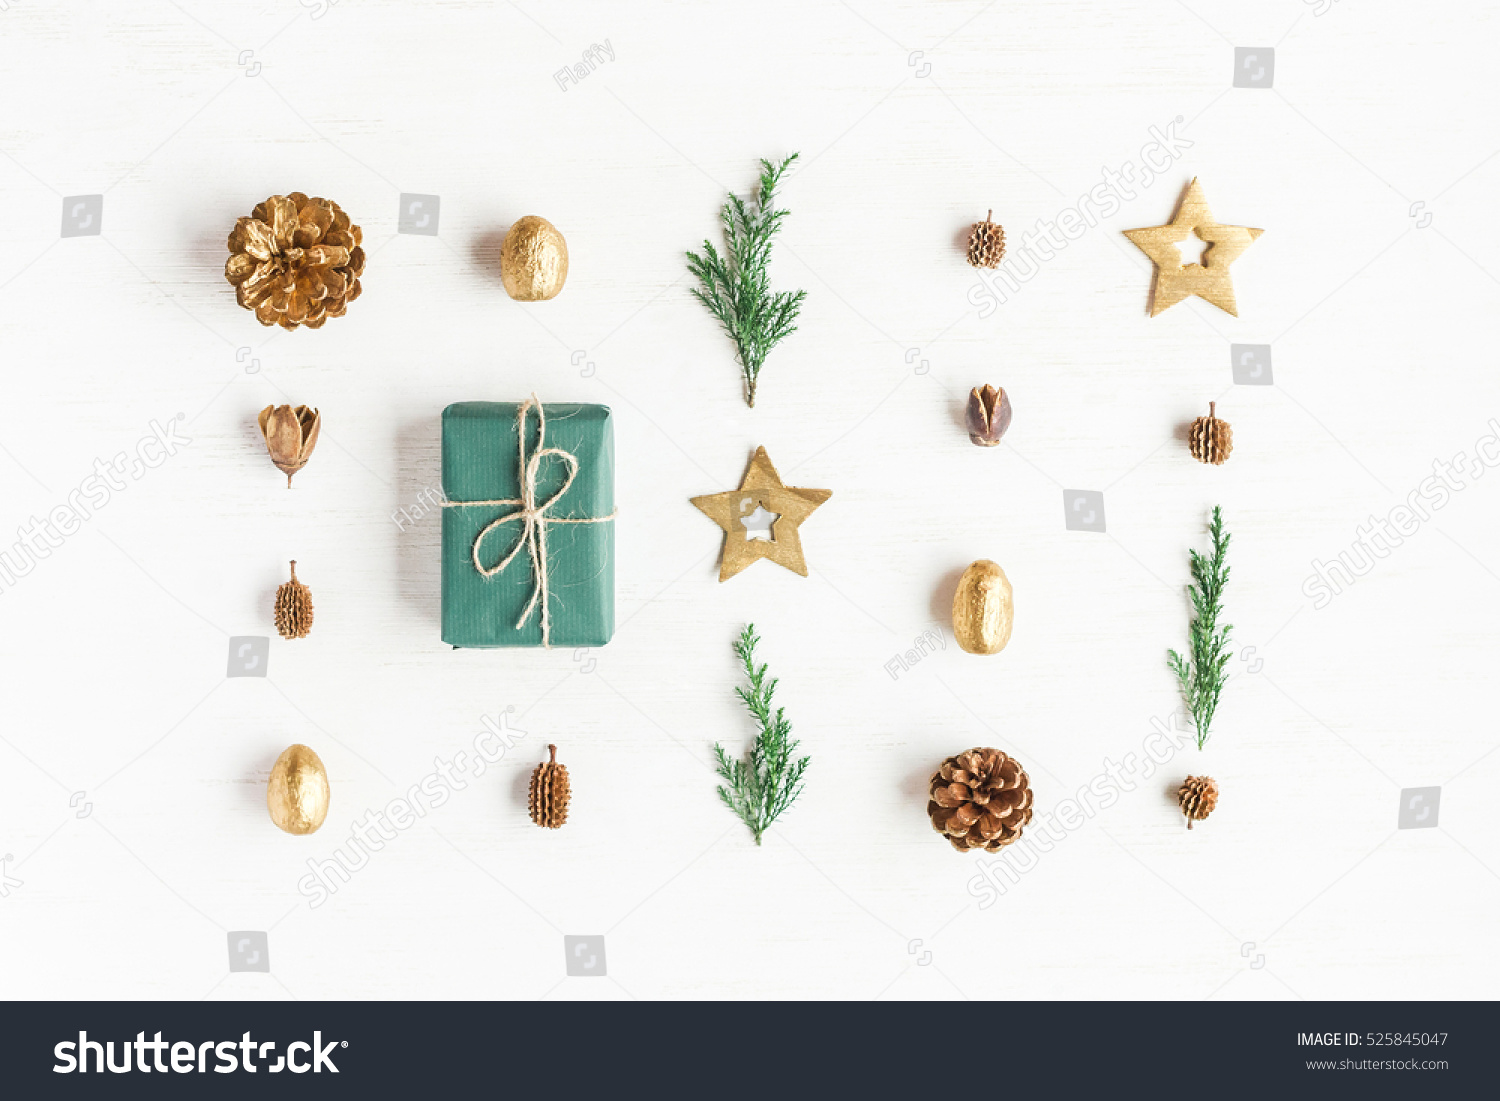 Christmas composition. Gift, christmas golden decorations, cypress branches, pine cones on white background. Flat lay, top view #525845047